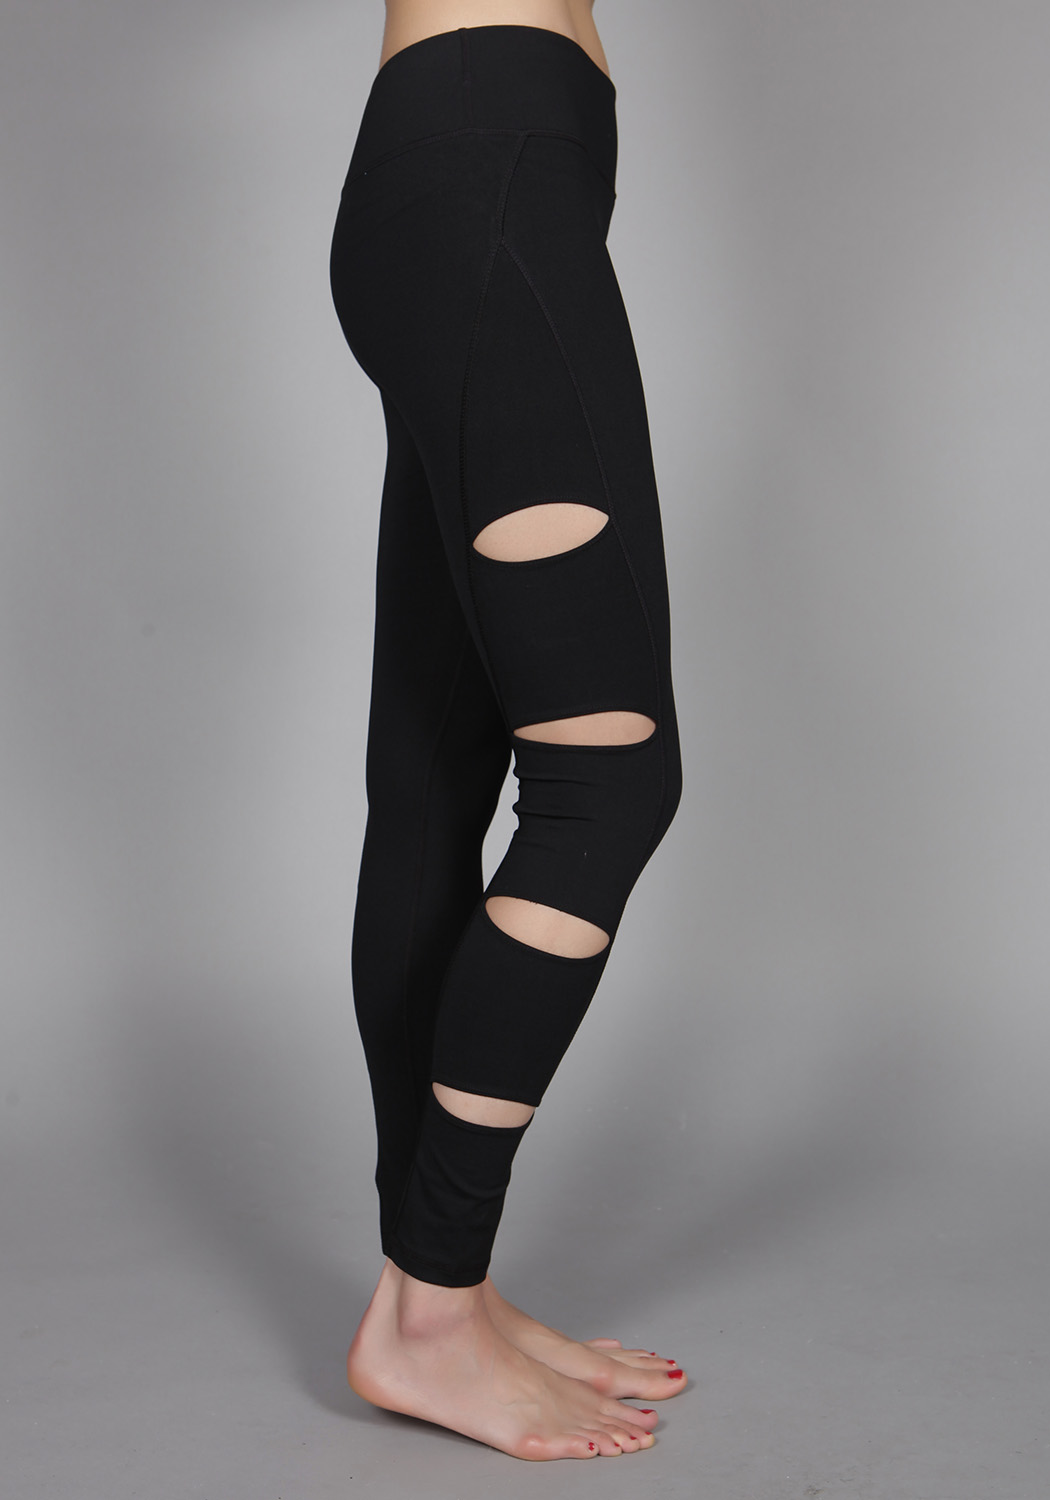 Cut Out Black Long Leggings – The One with Holes – Bodhi Me